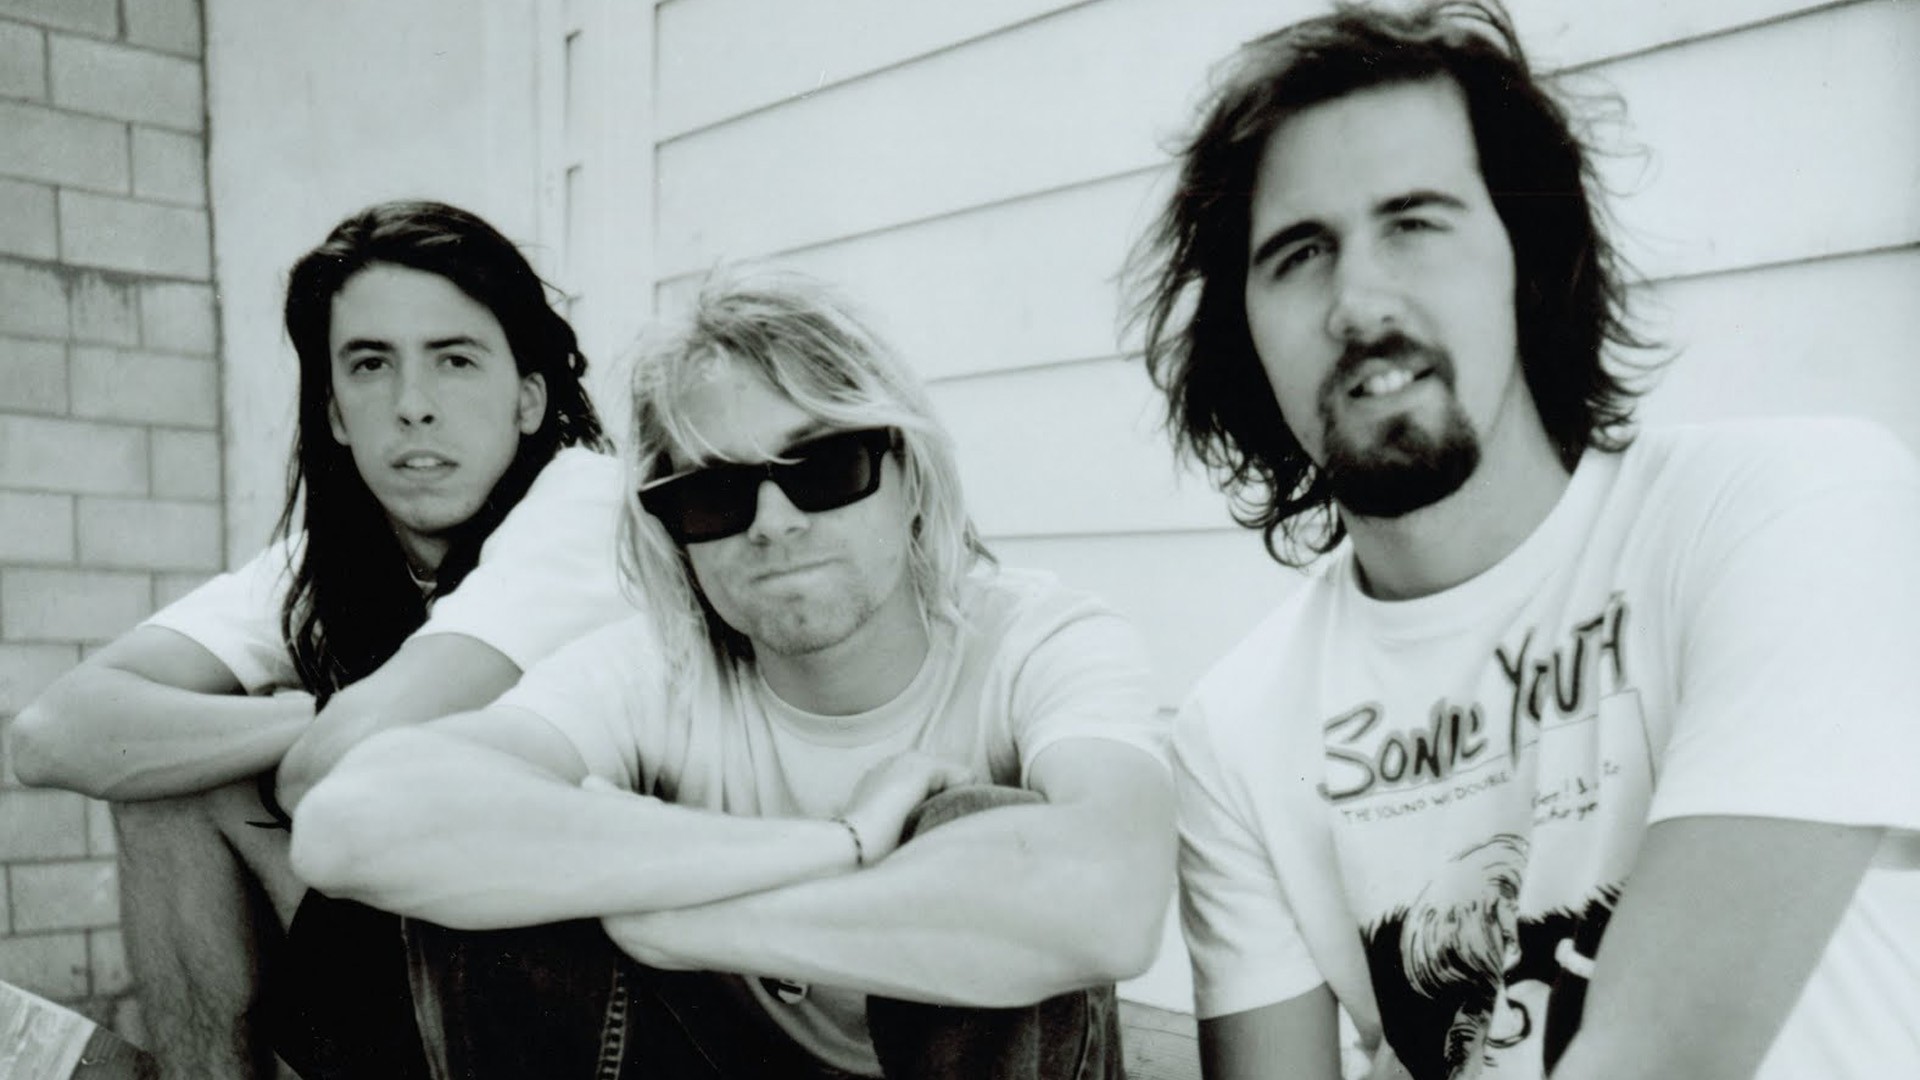 1920x1080 wallpaper.wiki-Nirvana-Sonic-Youth-Shirt-Pictures-PIC-